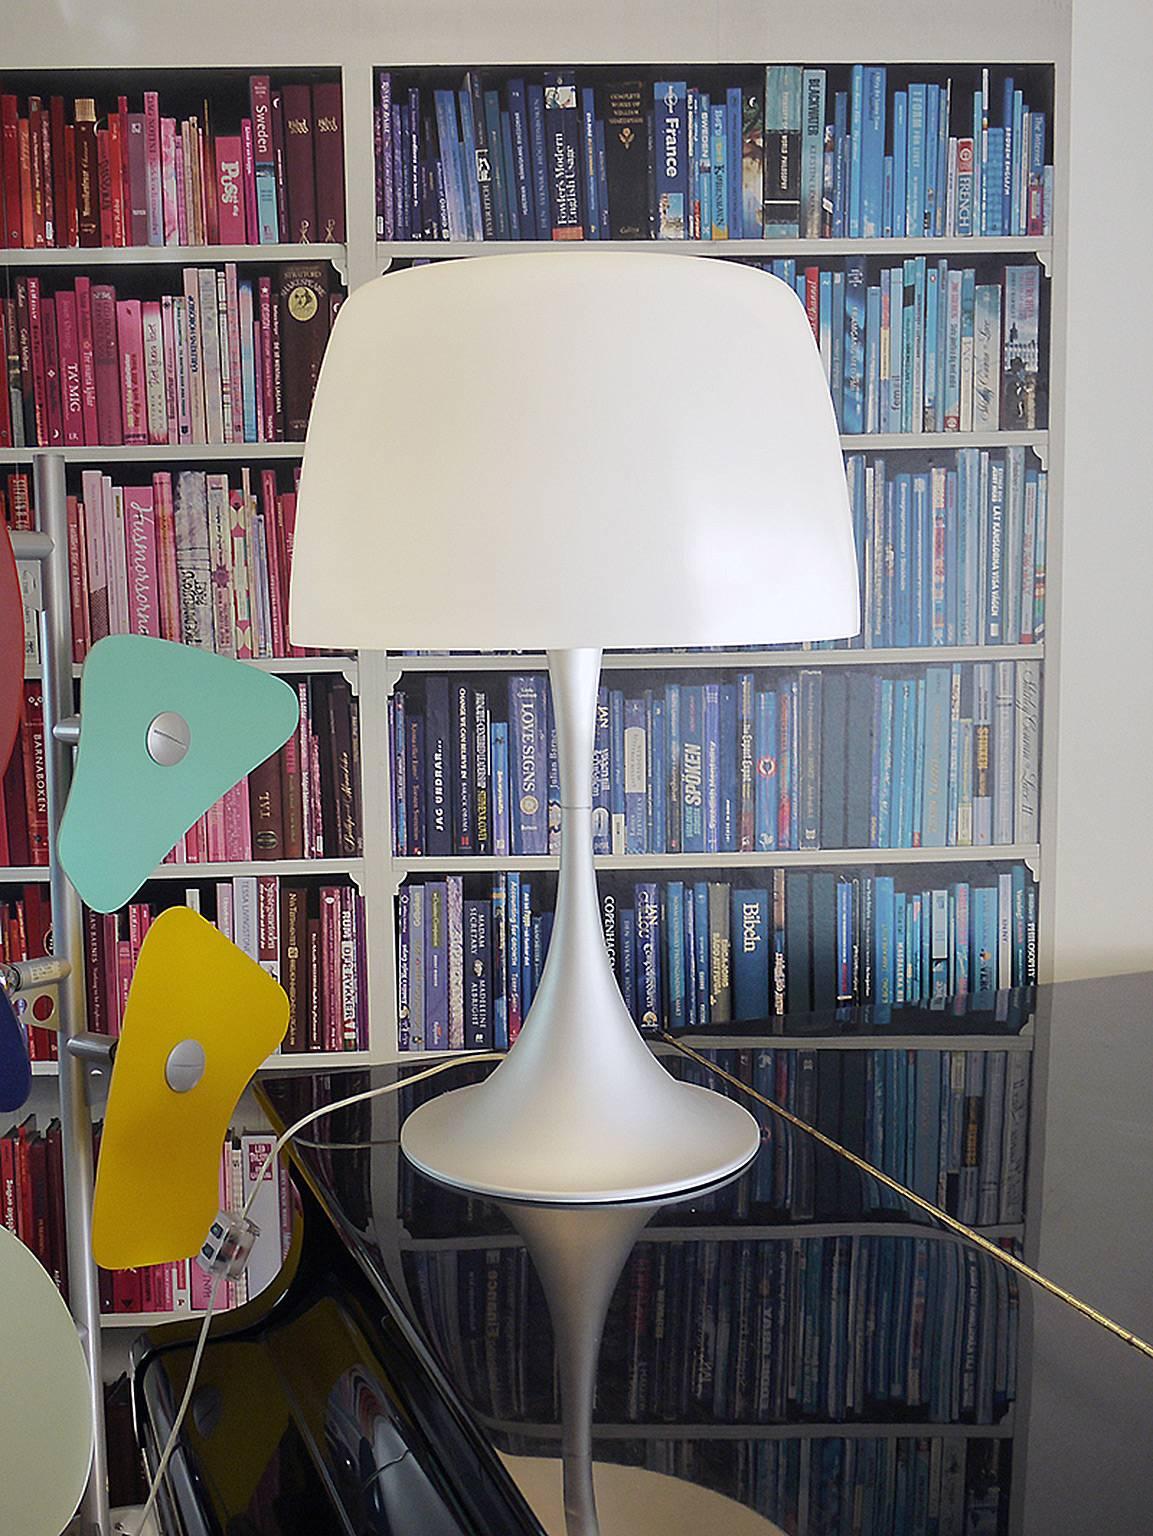 Wonderful large 'Amelie' table lamp with a white Murano glass shade on a silver aluminium base. The lighting shines both downwards and upwards and can be switched on and off as required. Heavy duty. Long out of production. The lamp illuminates